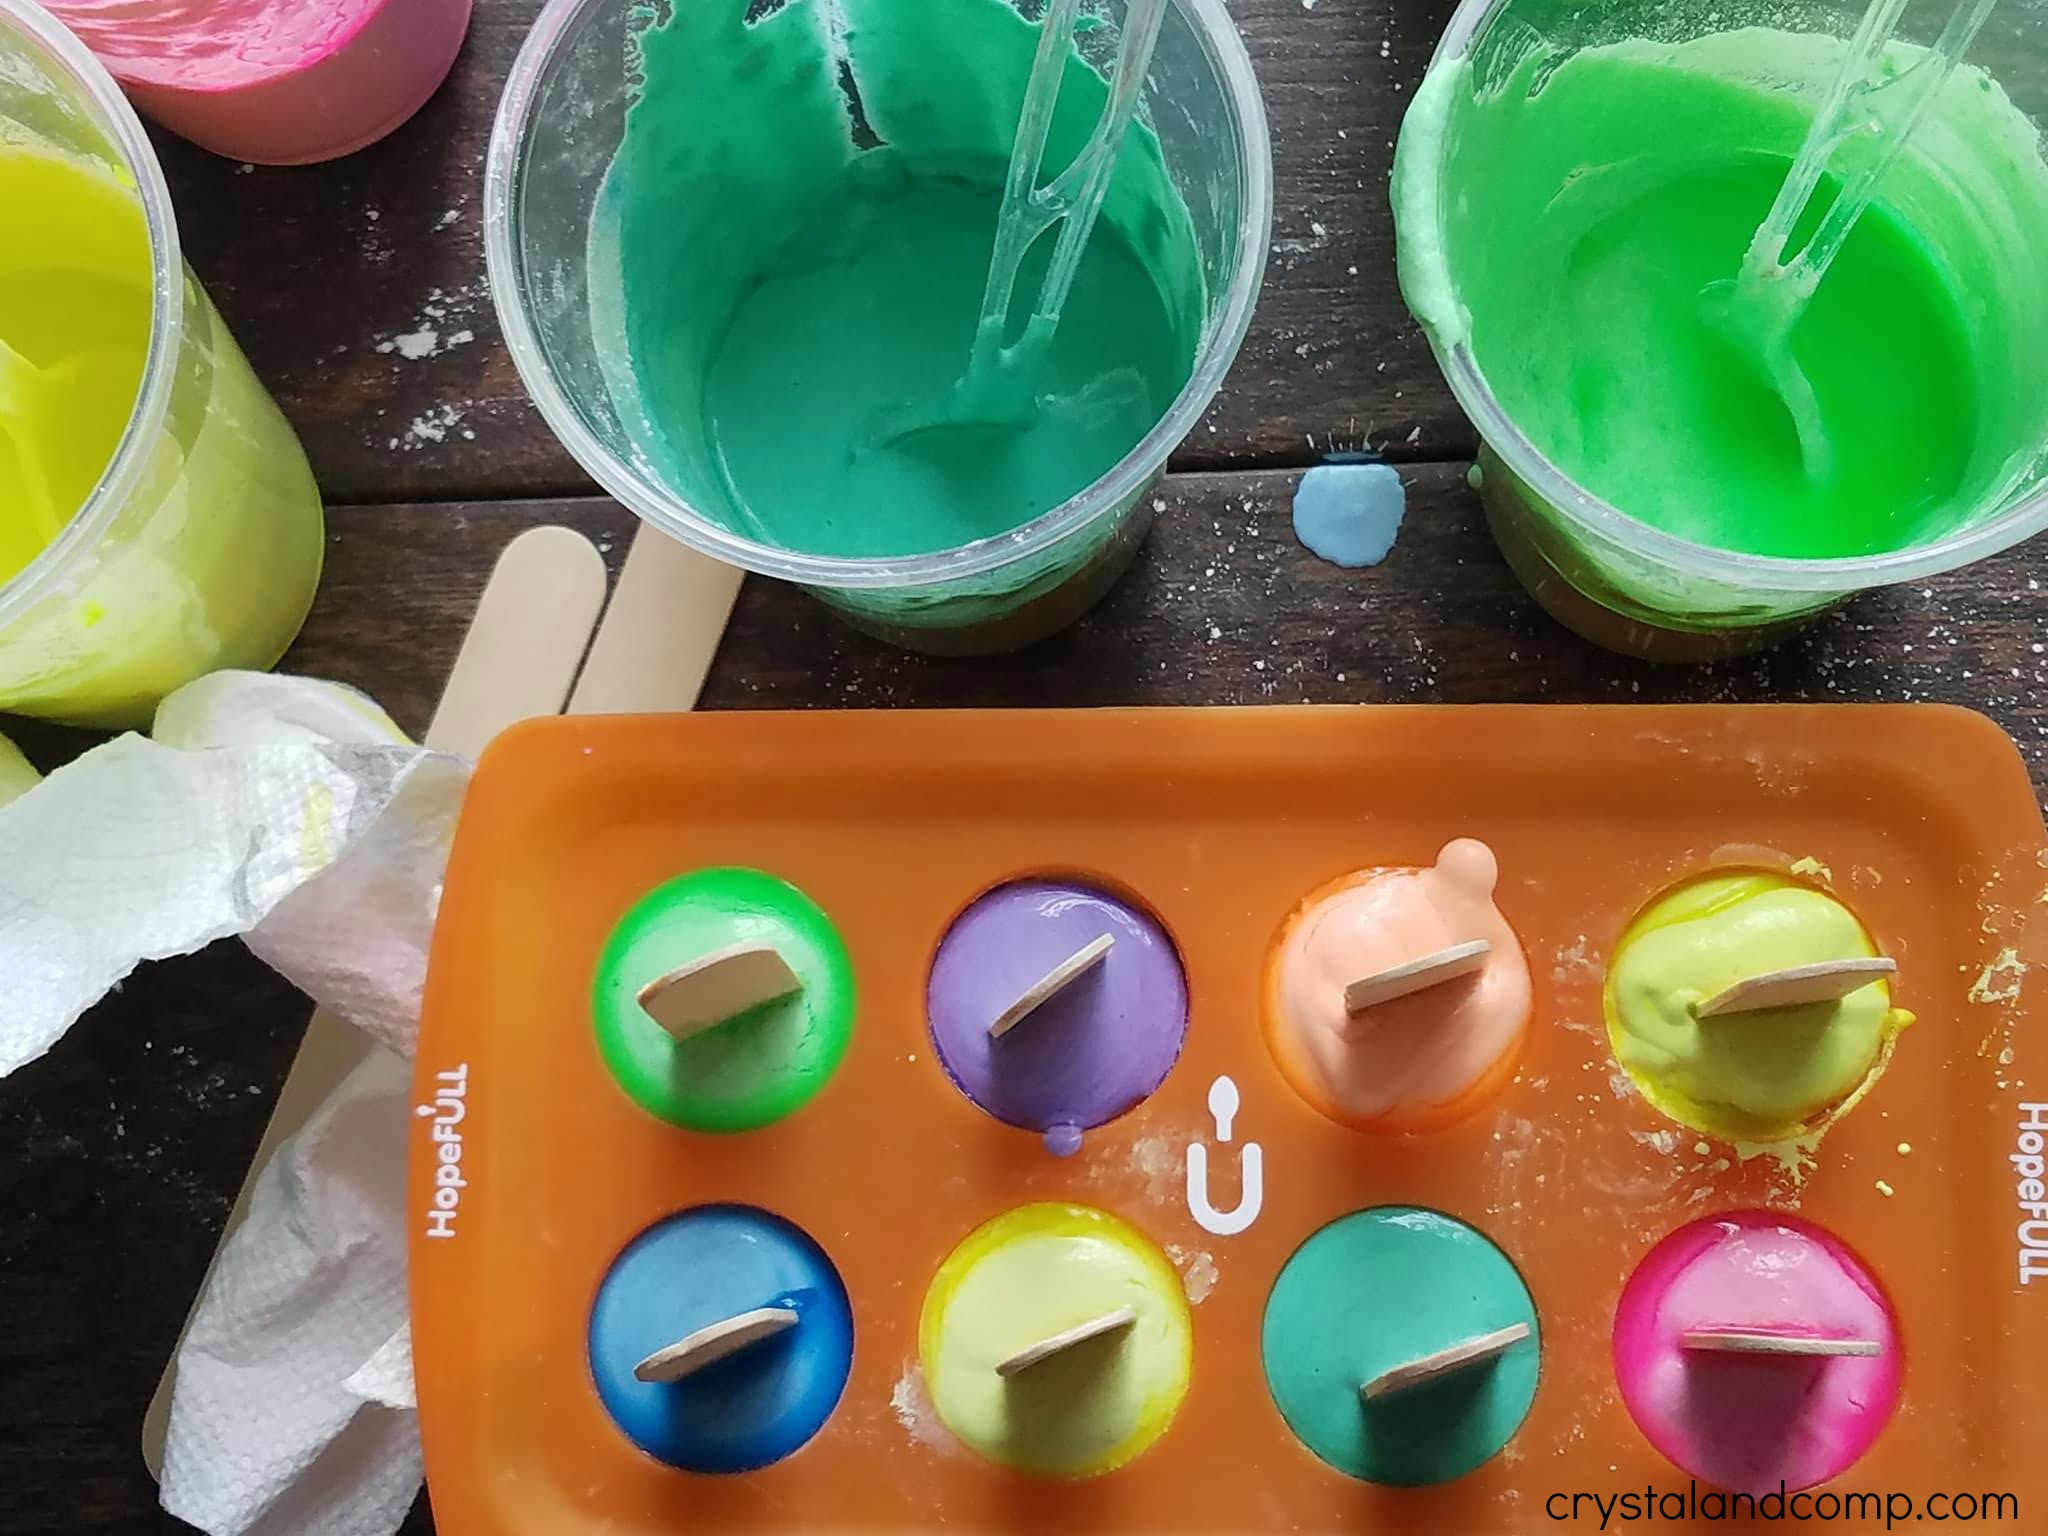 How to make silicone and corn starch molds for plaster rocks 